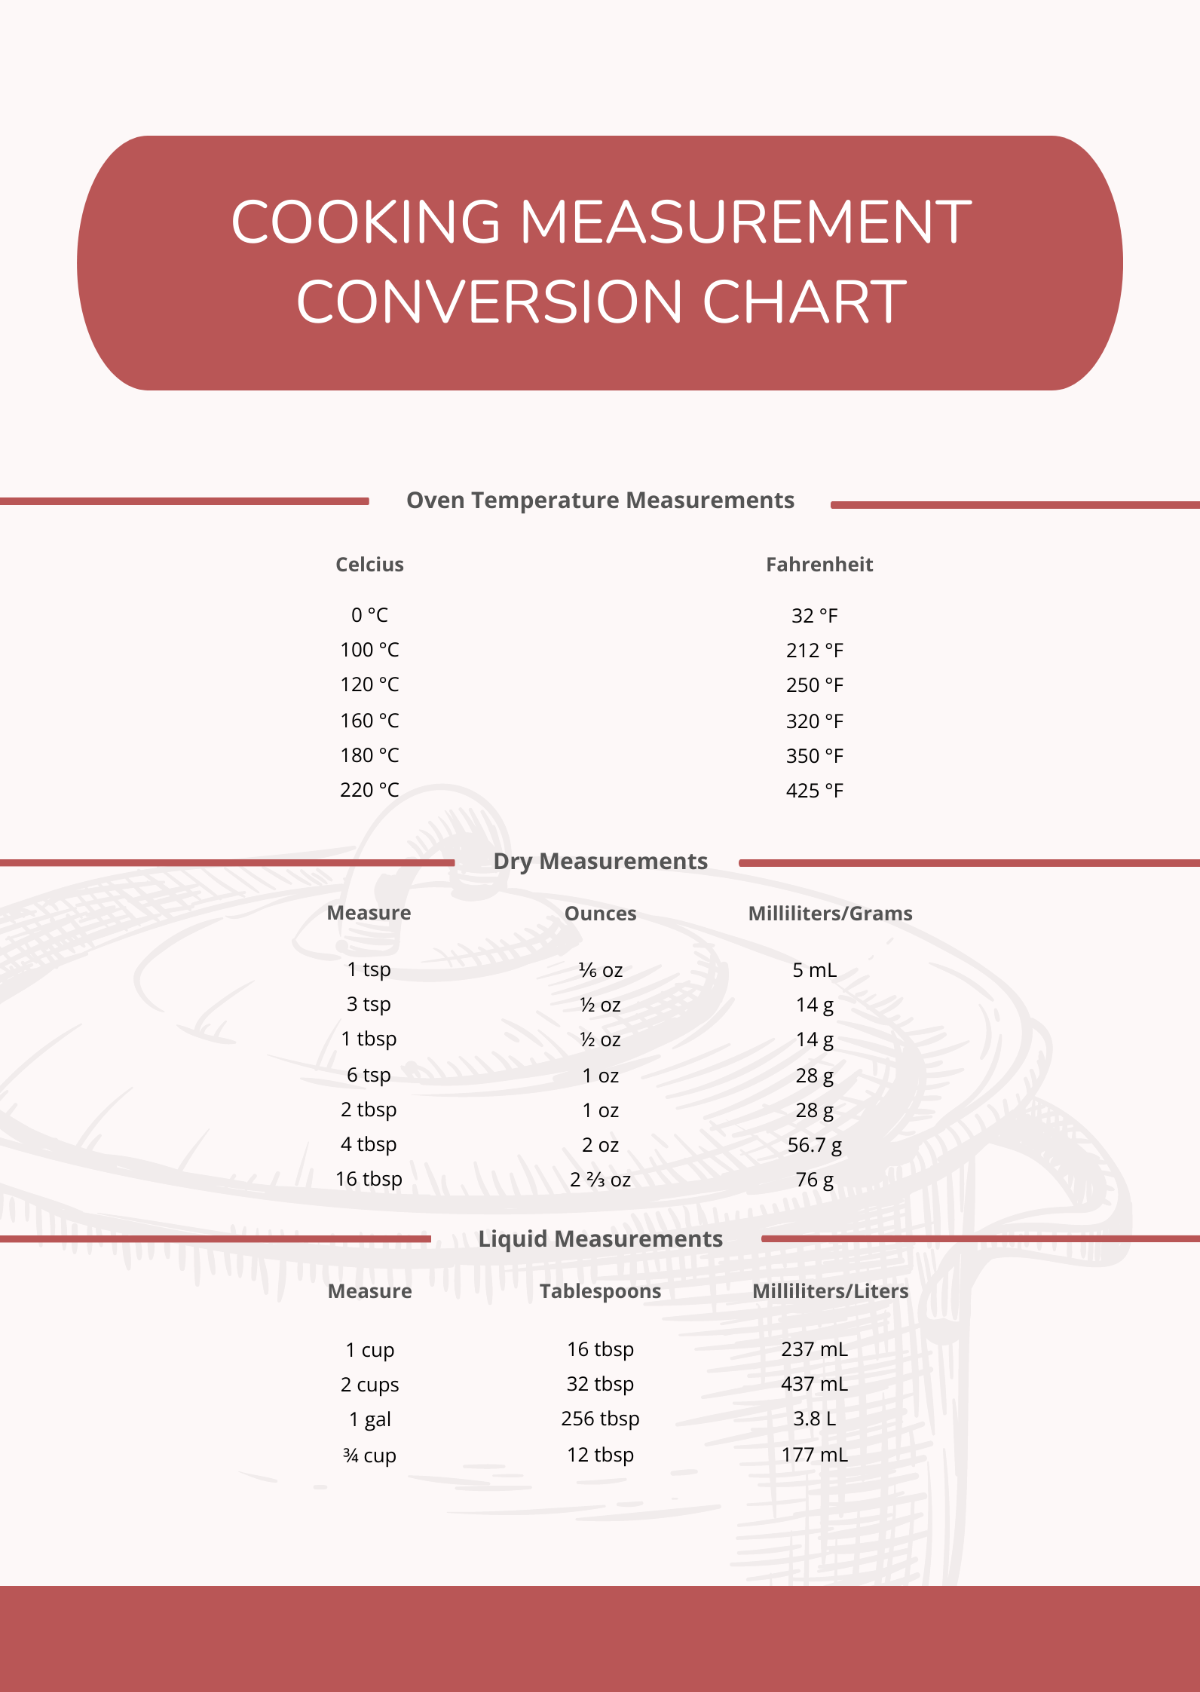 Cooking Measurement Conversion Chart Template